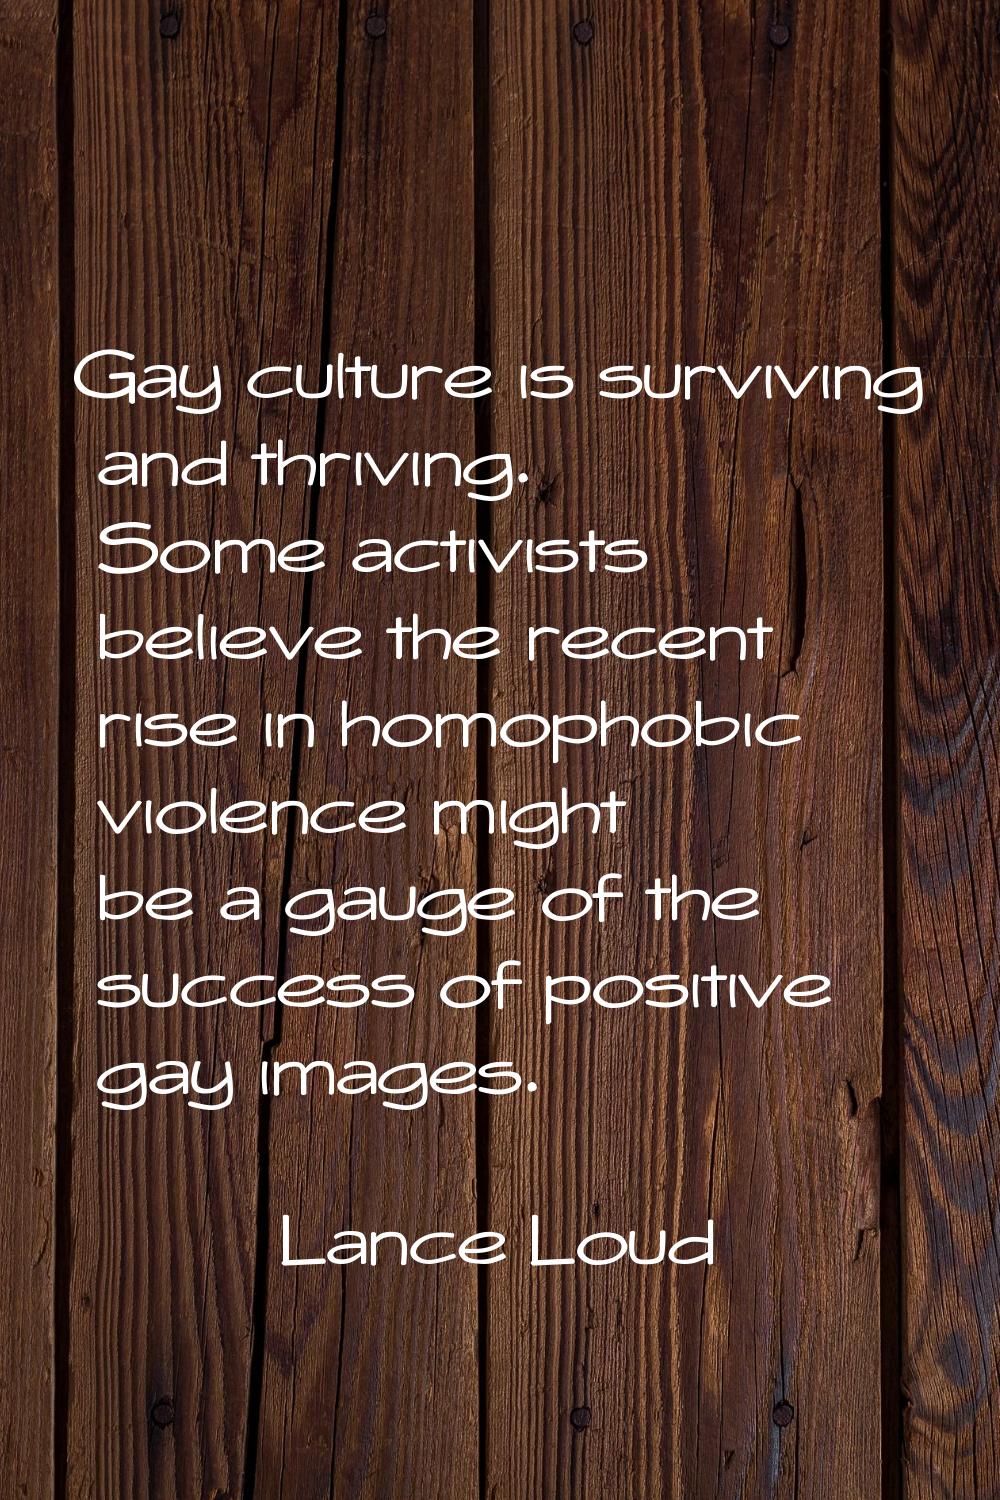 Gay culture is surviving and thriving. Some activists believe the recent rise in homophobic violenc